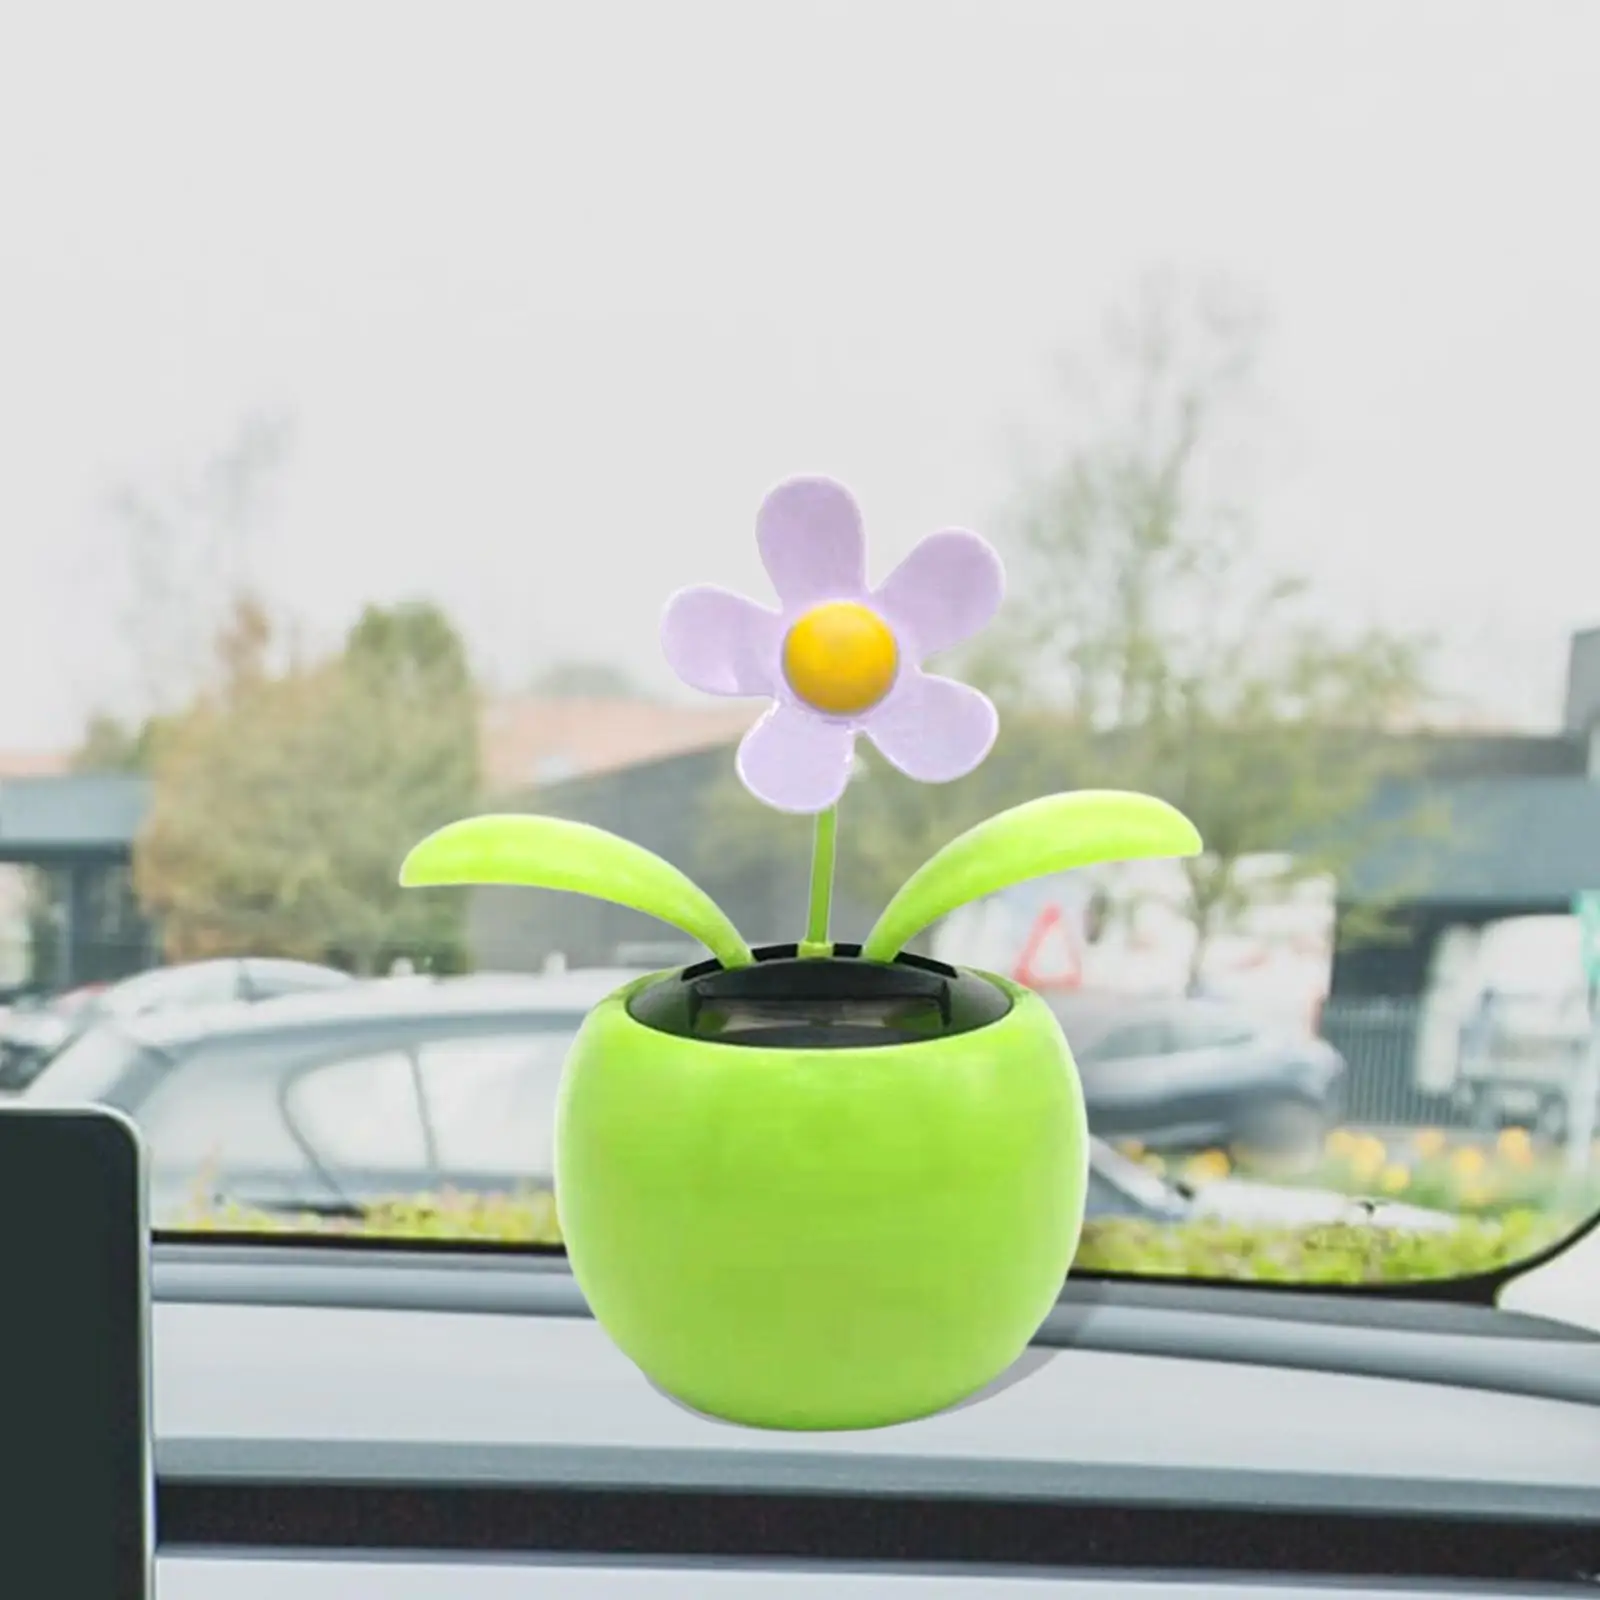 Solar Powered Dancing Flower Dancing Figurines Powered Toy Dancing Flower for Home Car Dashboard Kids Children Decor Baby